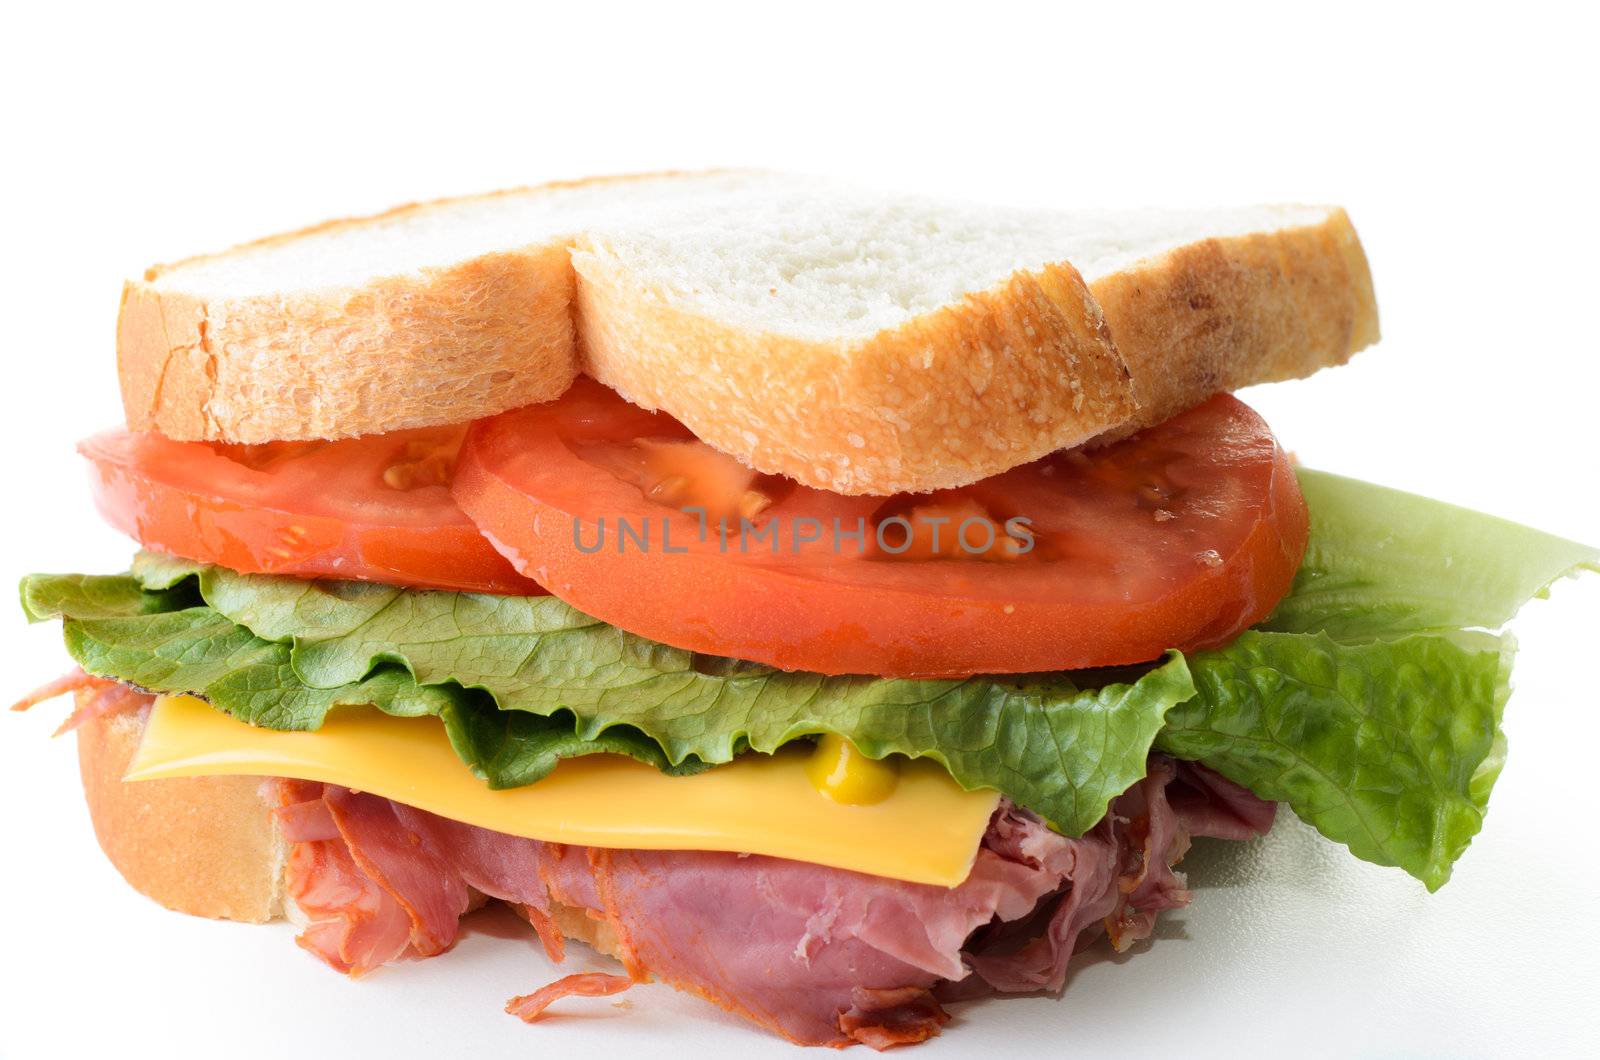 A corned beef sandwich with lettuce tomatoes and cheese.